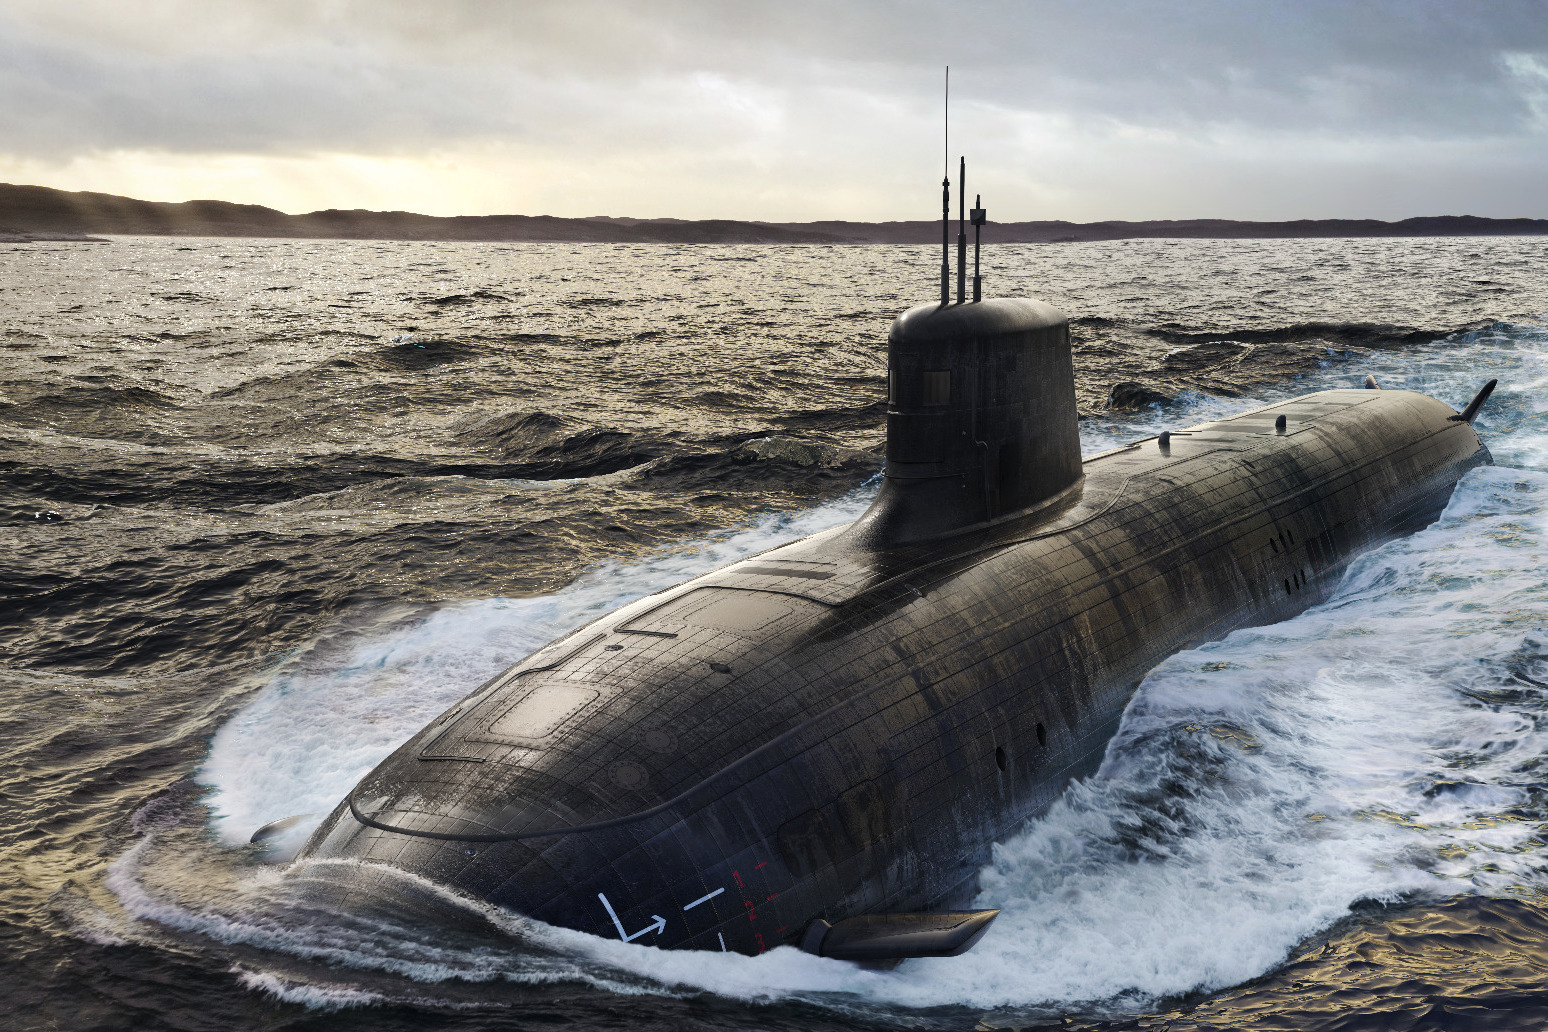 Australia to operate nuclear-powered submarines based on British design 